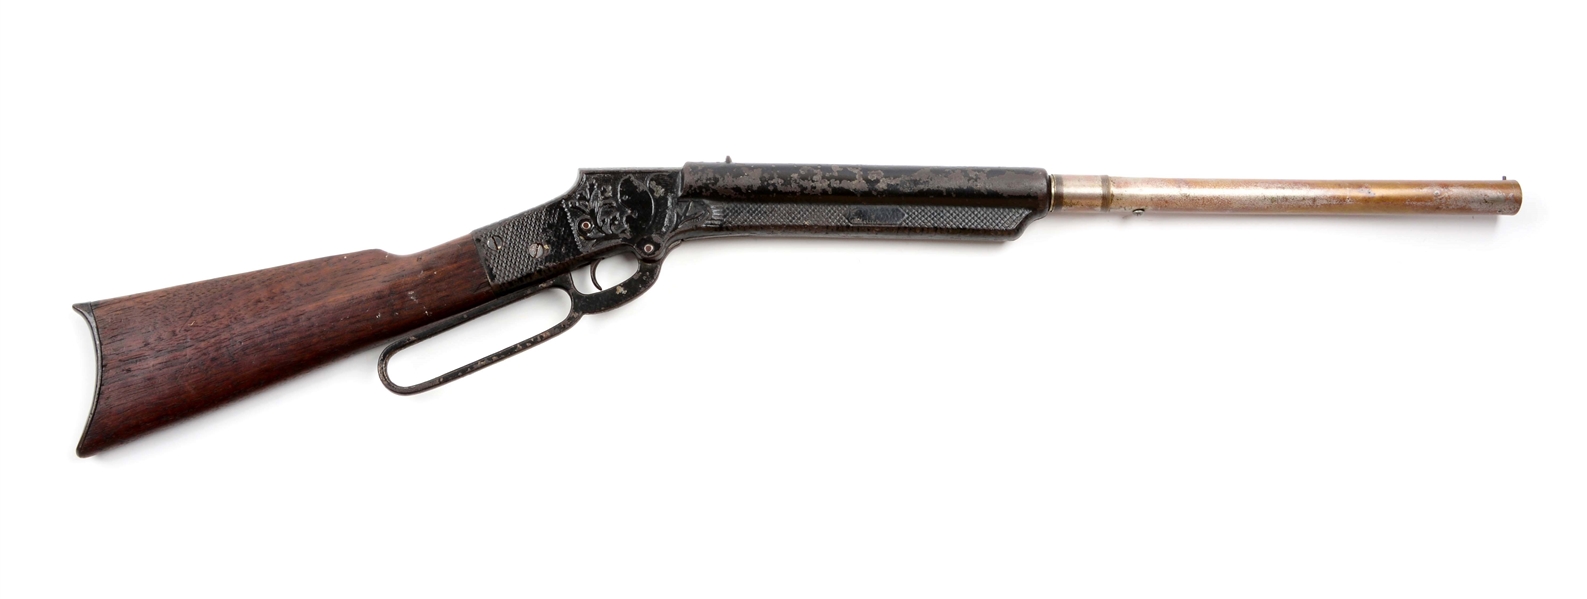 COLOMBIAN MODEL 1895 CAST FRAME AIR RIFLE.